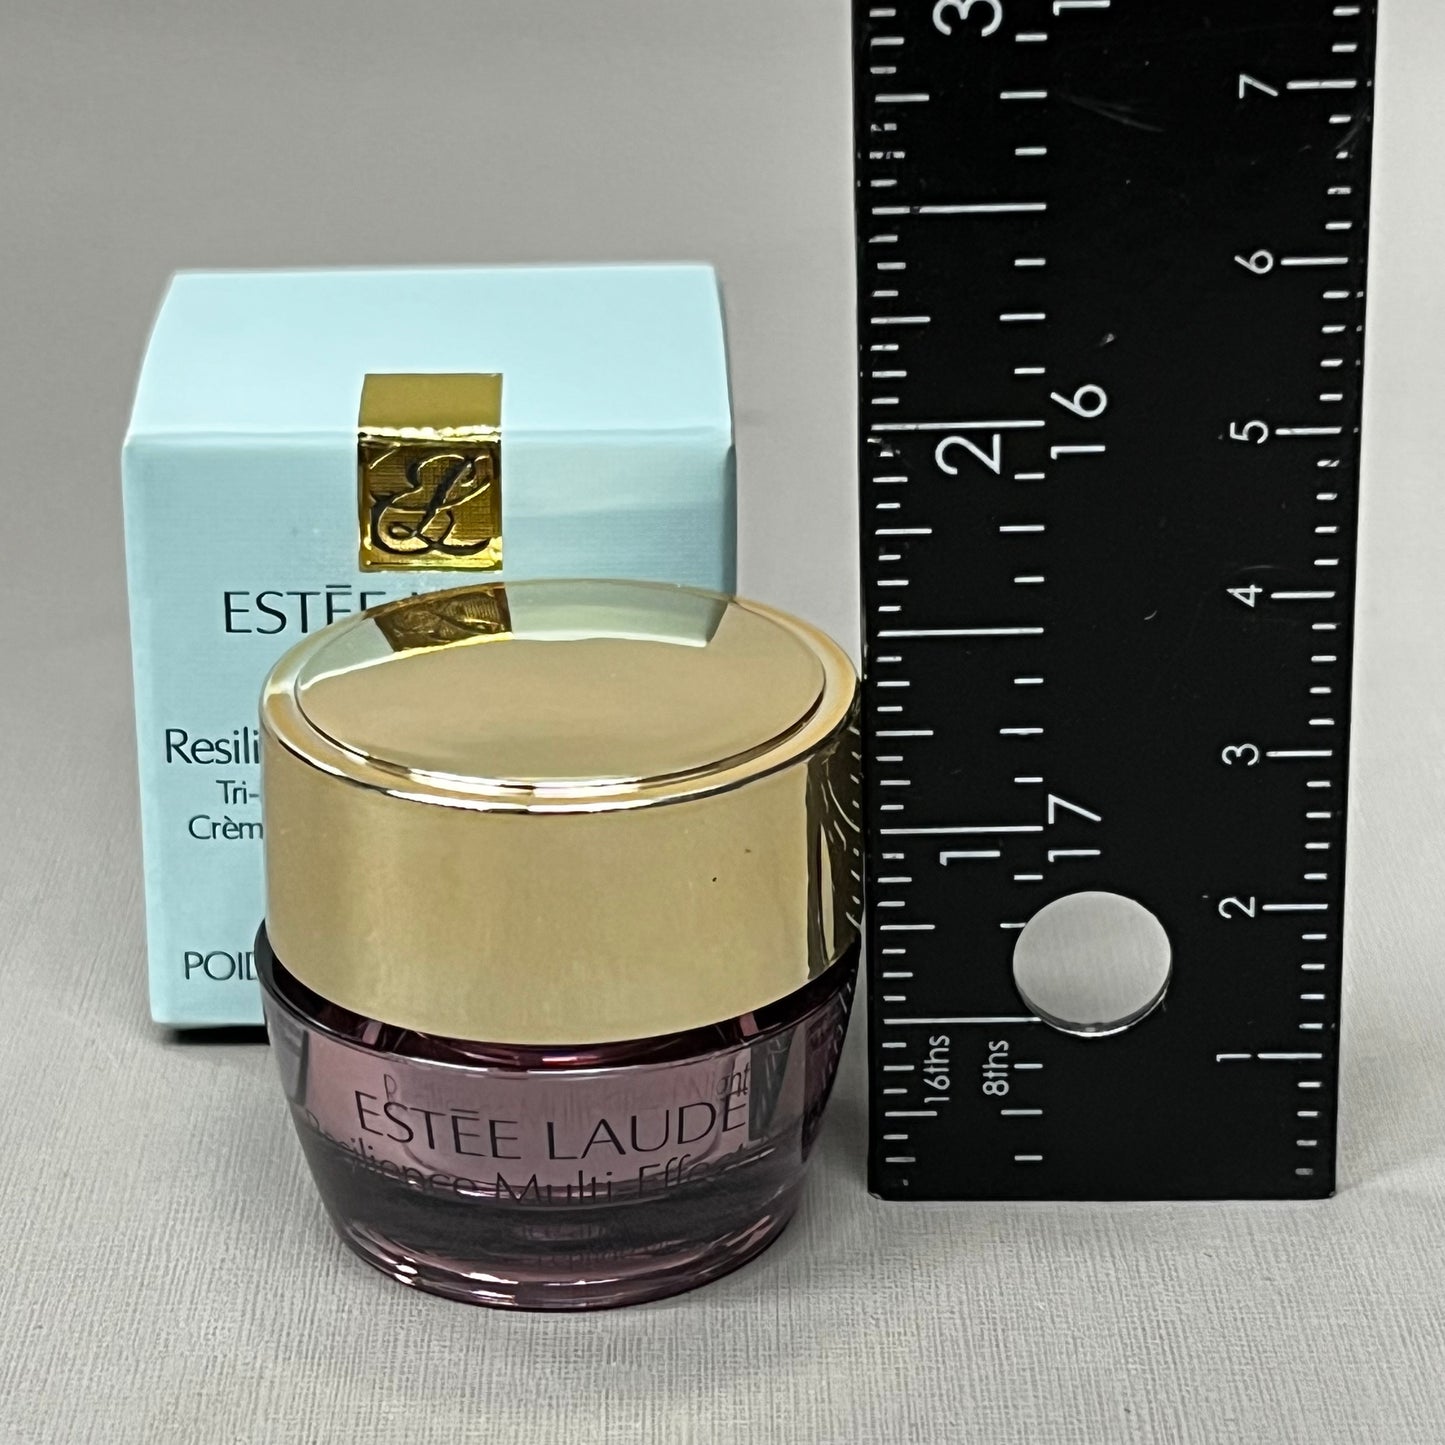 ESTEE LAUDER 4-PACK! Resilience Multi-Effect Night Face and Neck Cream .17 oz./5mL (New)